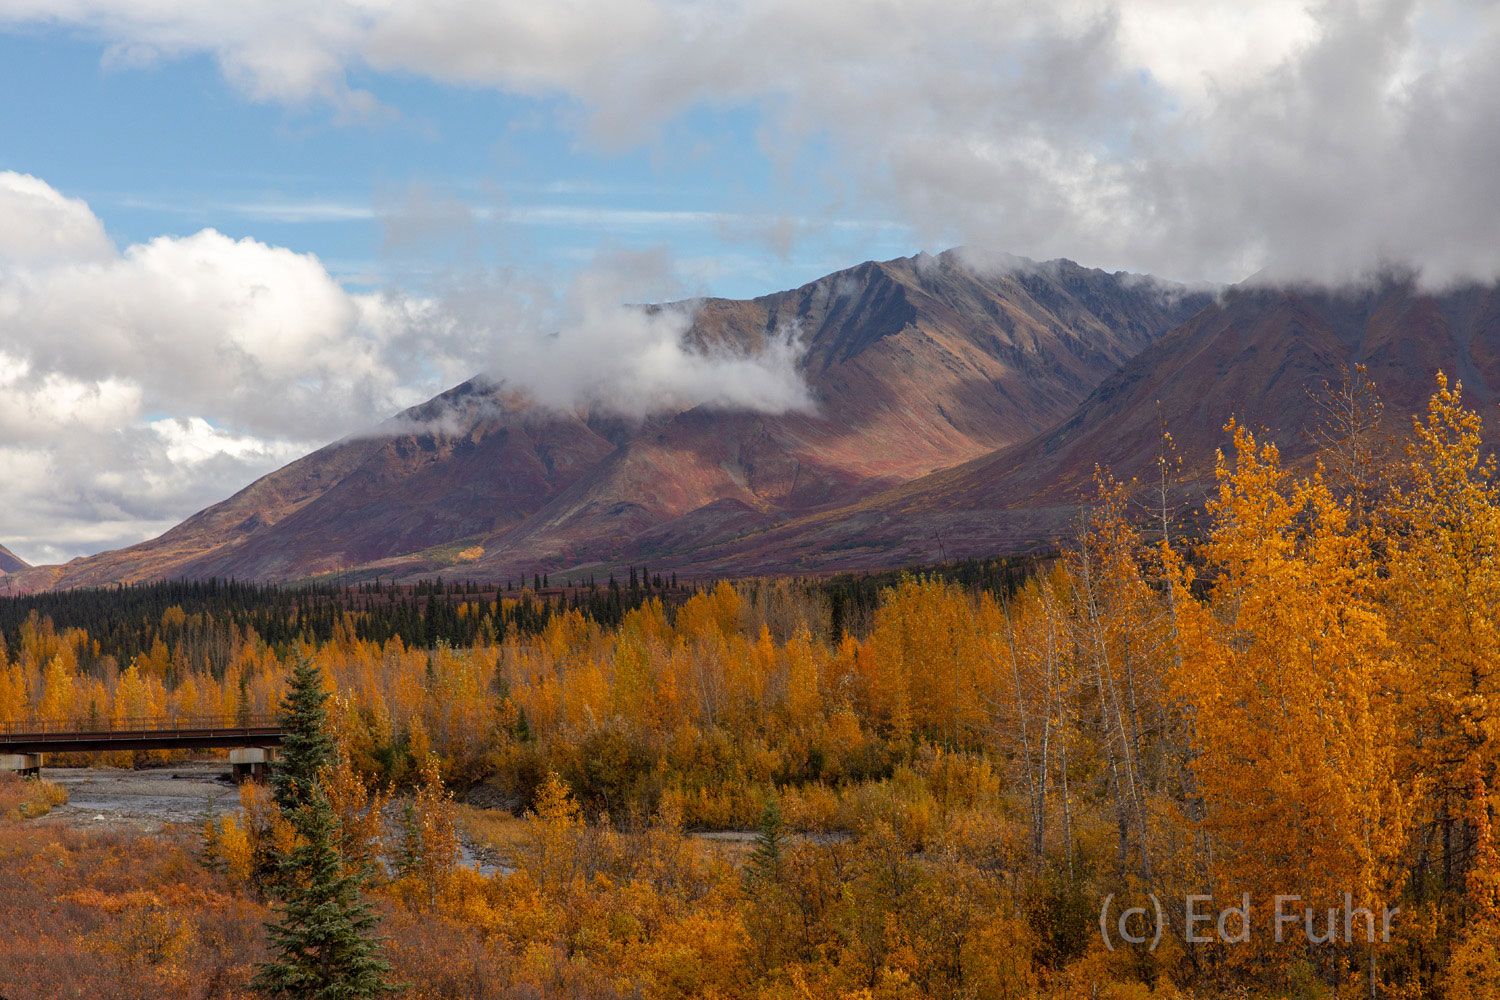 Along the banks of the Chulitna River on Denali's east side grows some of the most magnificent stands of larch and aspen.